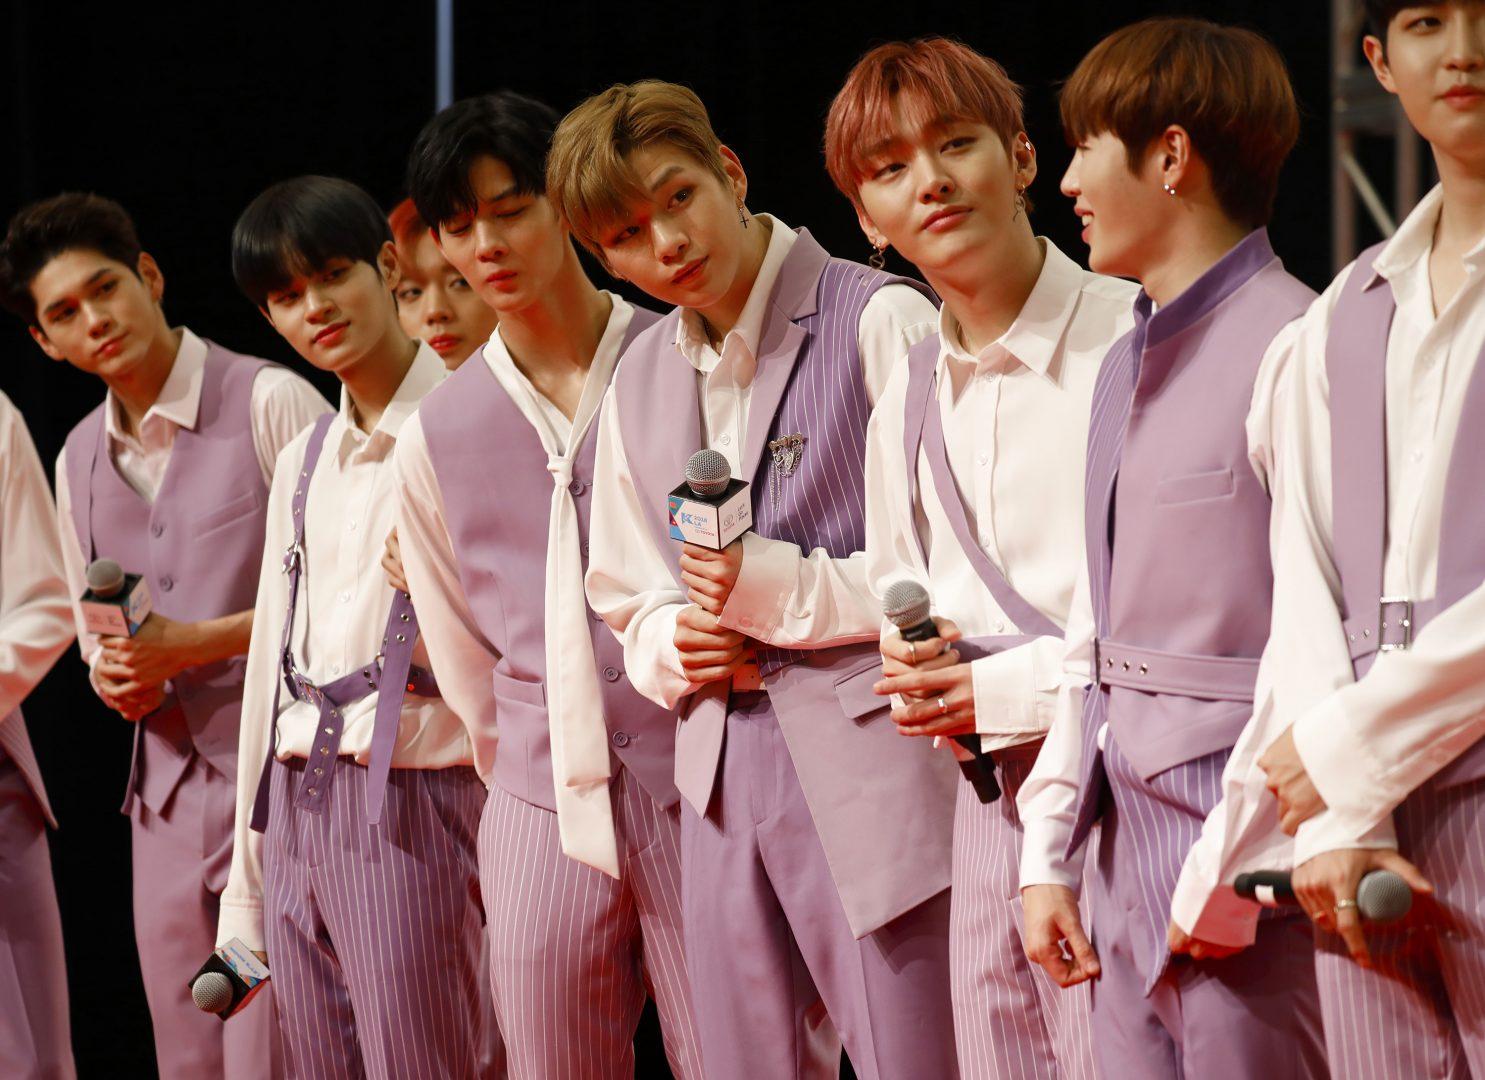 K-Pop performers Wanna One on stage during the red carpet at KCON LA at the Los Angeles Convention Center in Los Angeles, Calif. on Saturday, Aug. 11, 2018. (Francine Orr/Los Angeles Times/TNS)